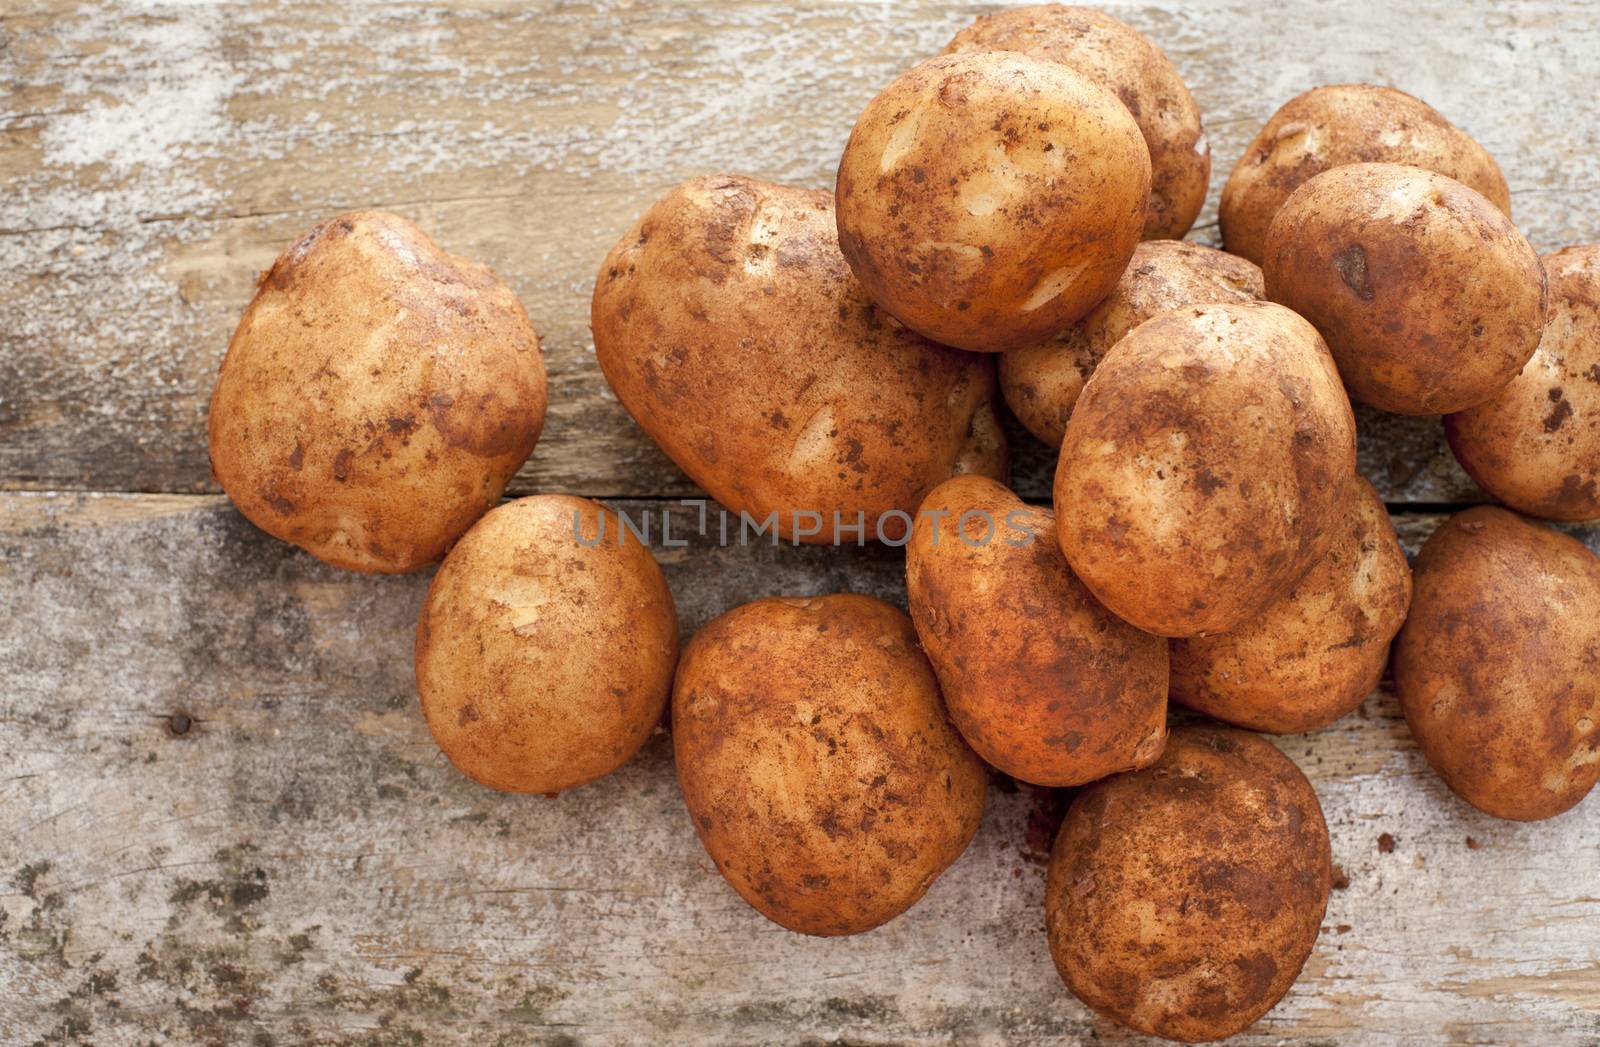 Pile of fresh whole farm potatoes by stockarch